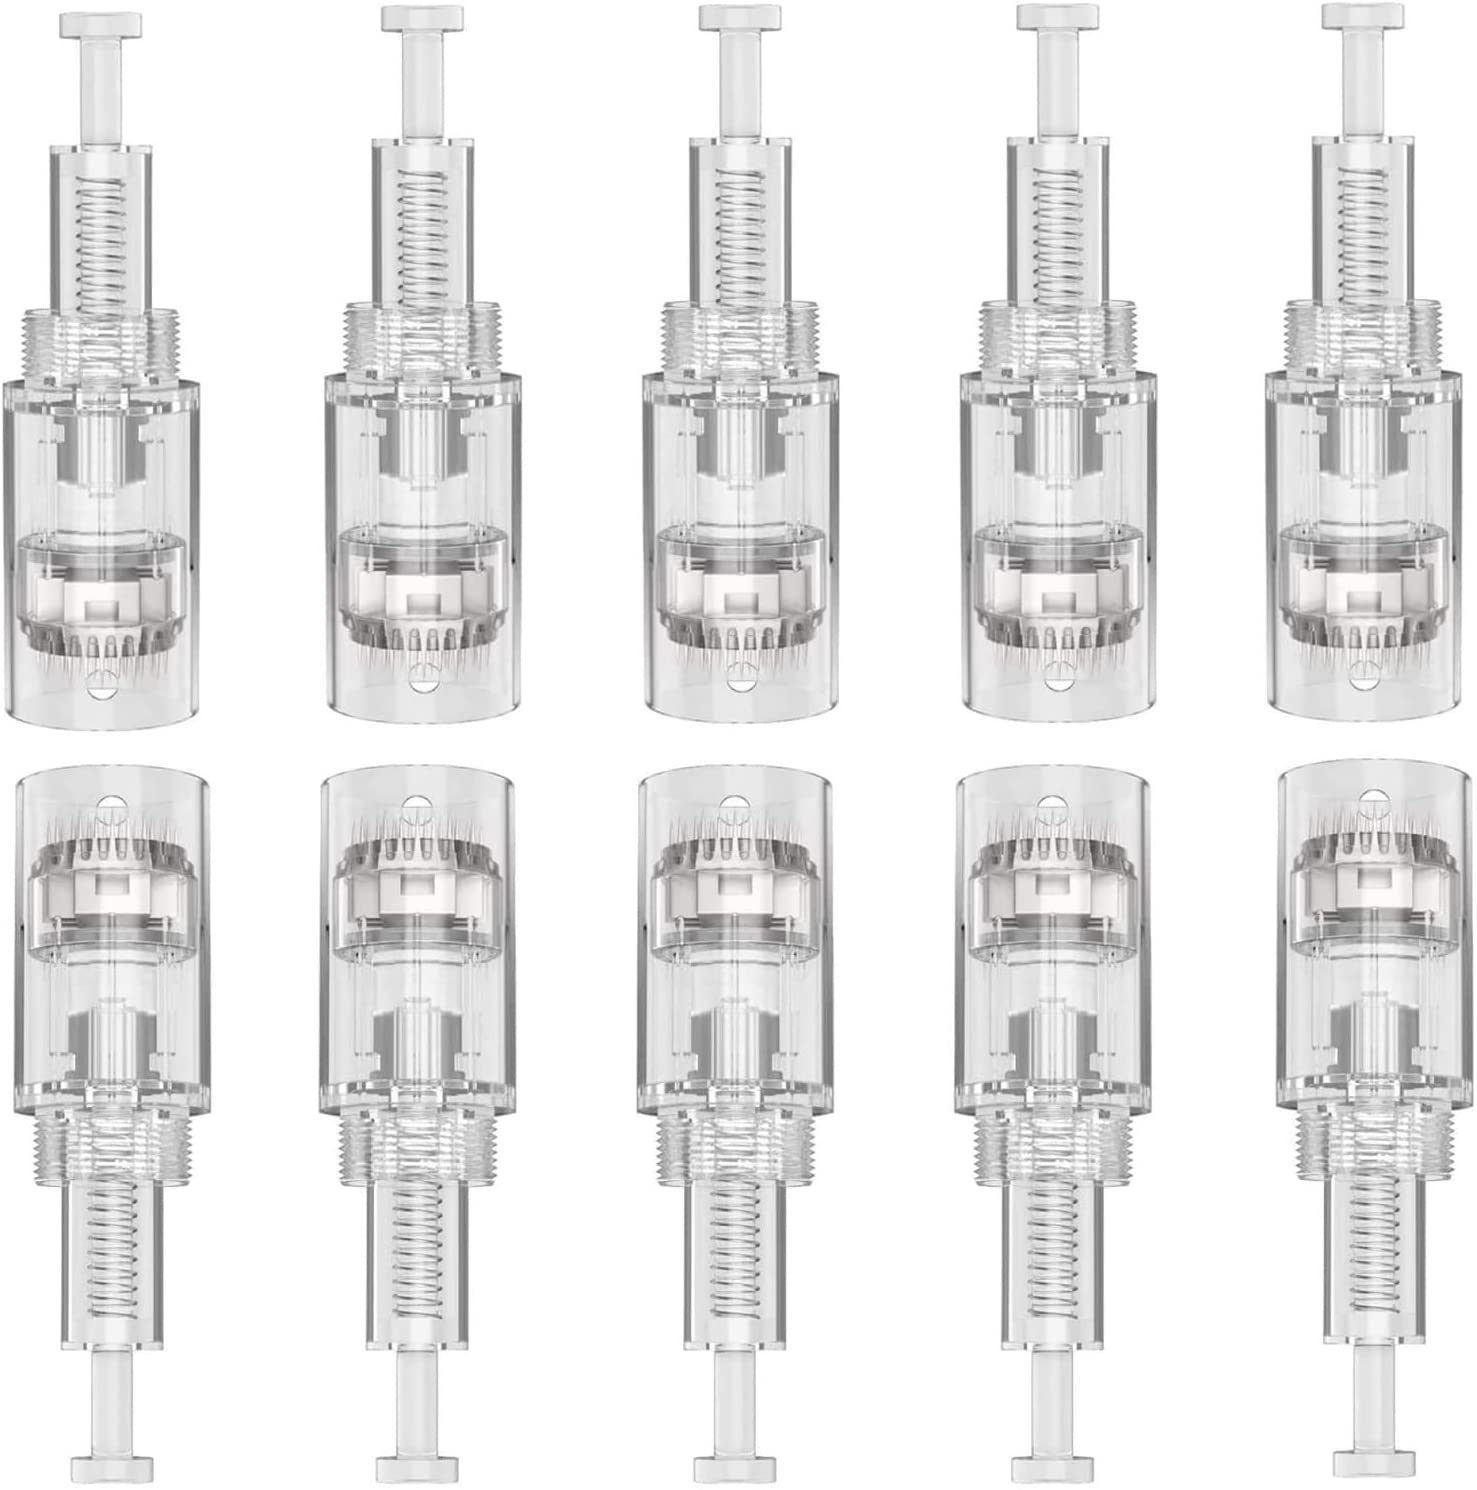 P-Beauty Cosmetic Accessories Dermapen 36 Needle Cartridges Replacement Needle Cartridges for Car Derma Electric Pen Microneedling Thread Closure Thread Slot Pack of 10 (36 Pins)